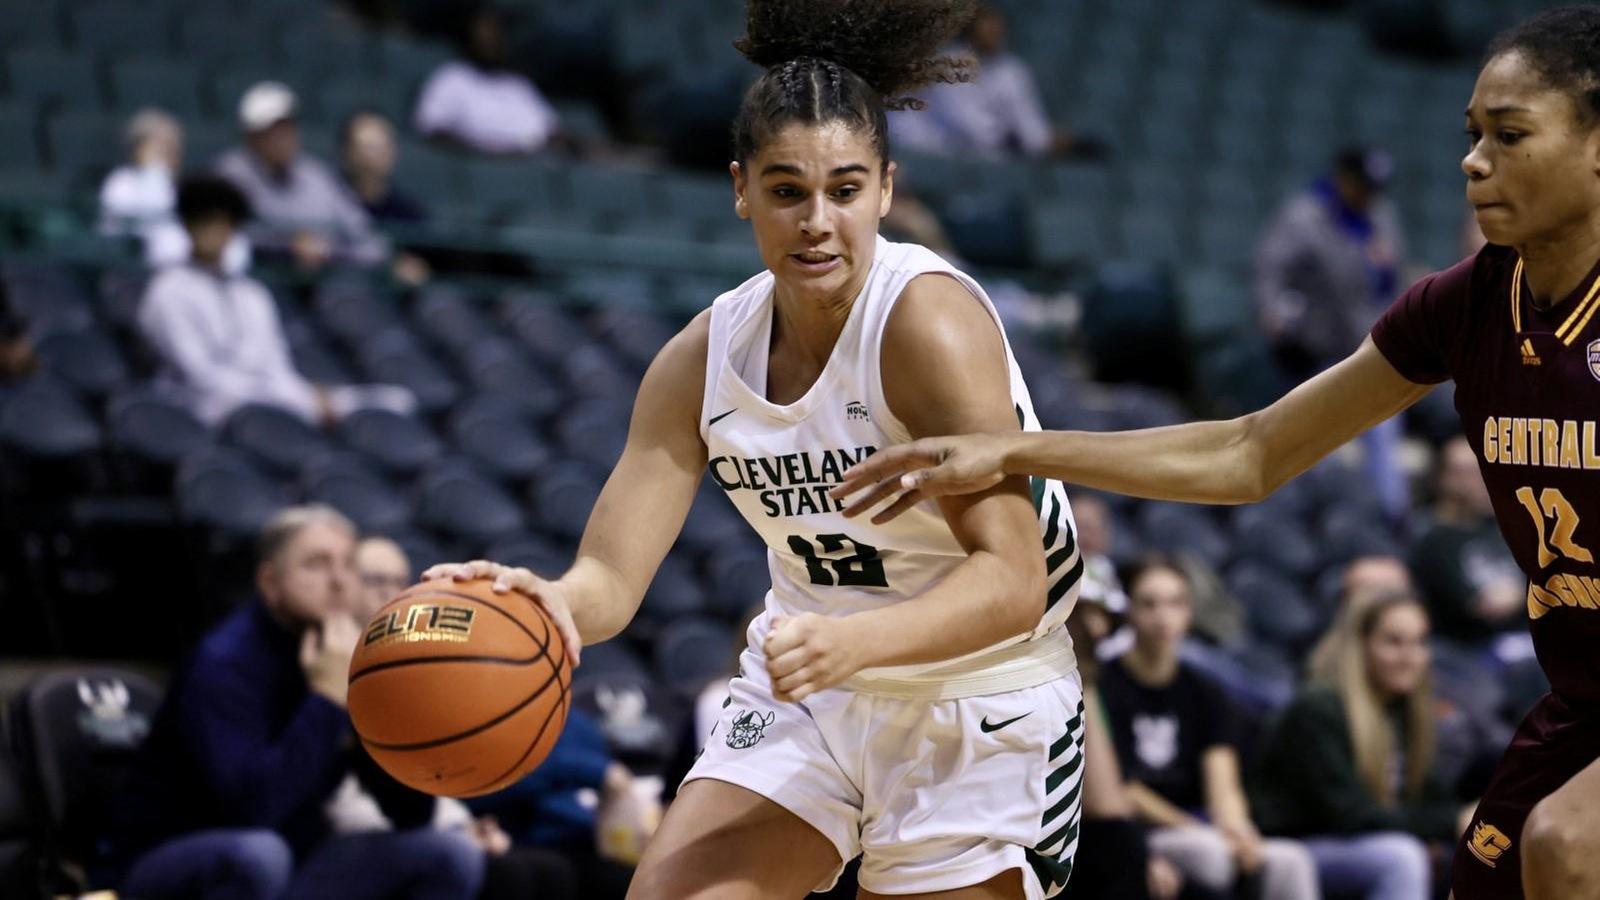 Cleveland State Women’s Basketball Picks Up 96-57 Victory Over Central Michigan In Home Opener